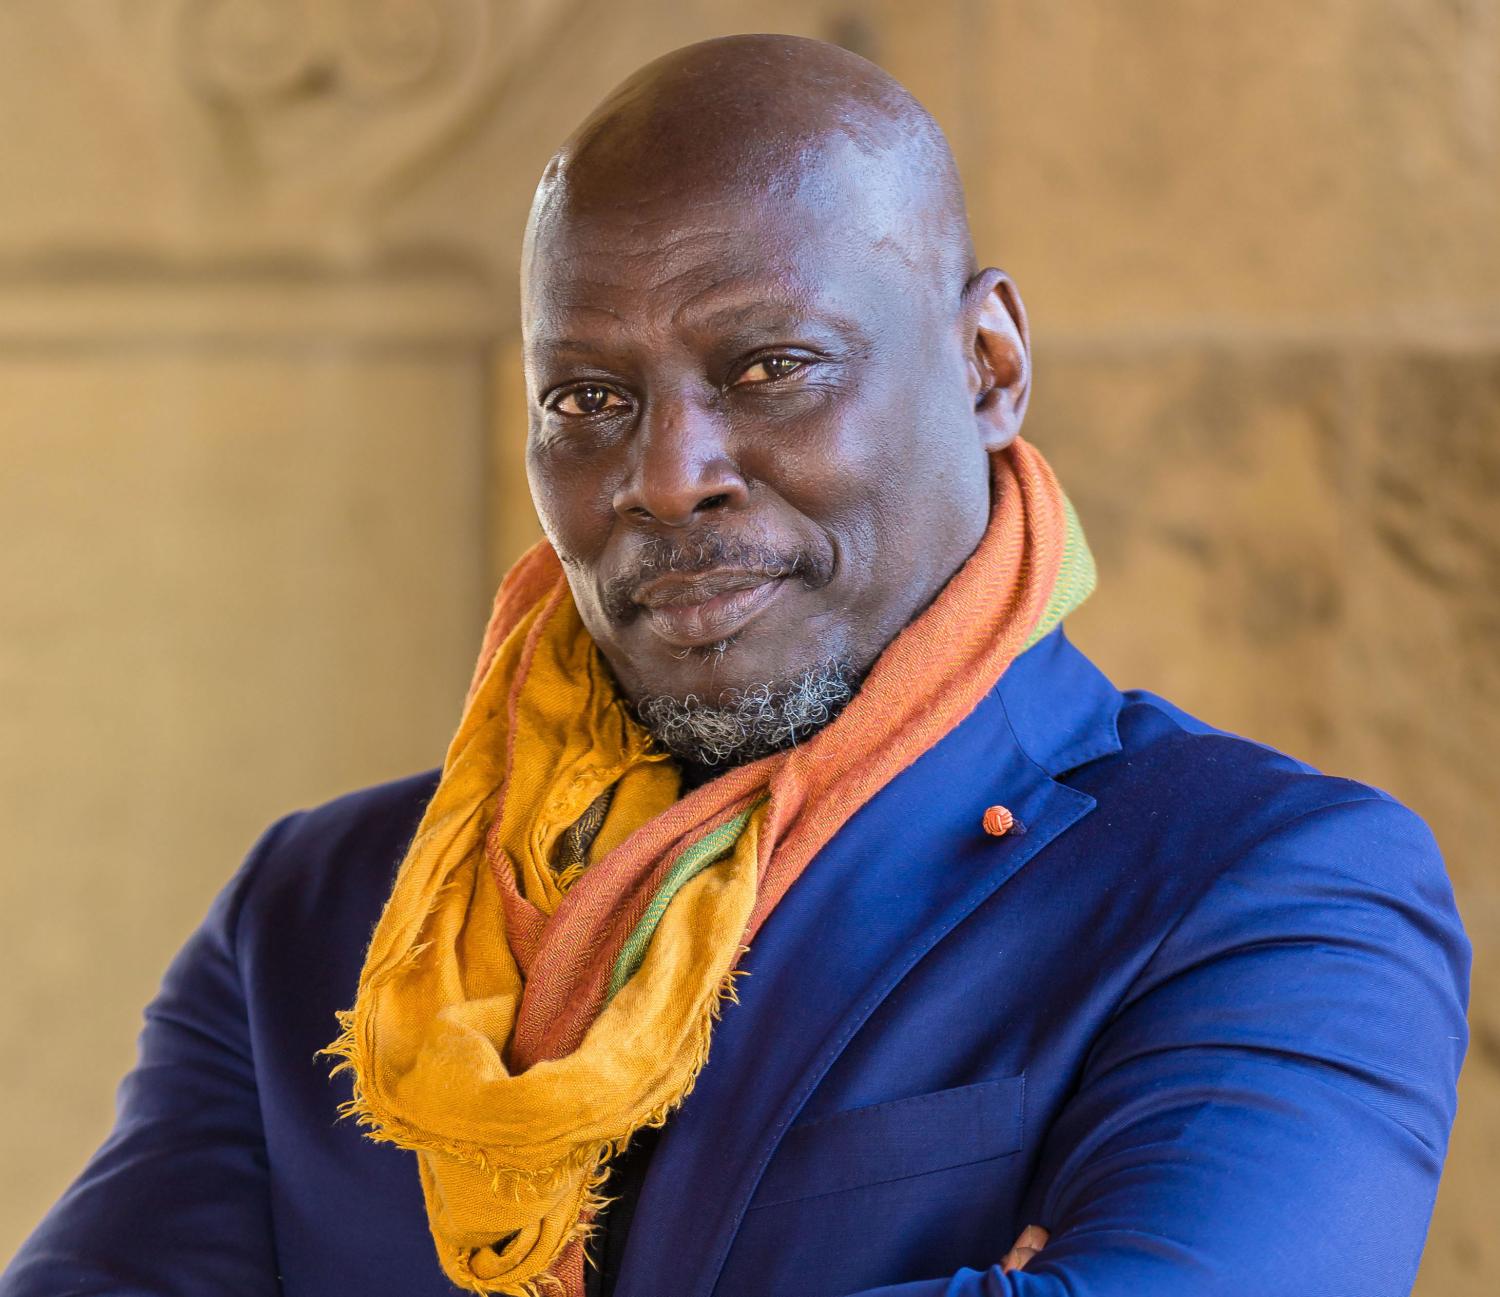 Ato Quayson in a blue suit, orange scarf, smiling at the camera with arms folded.